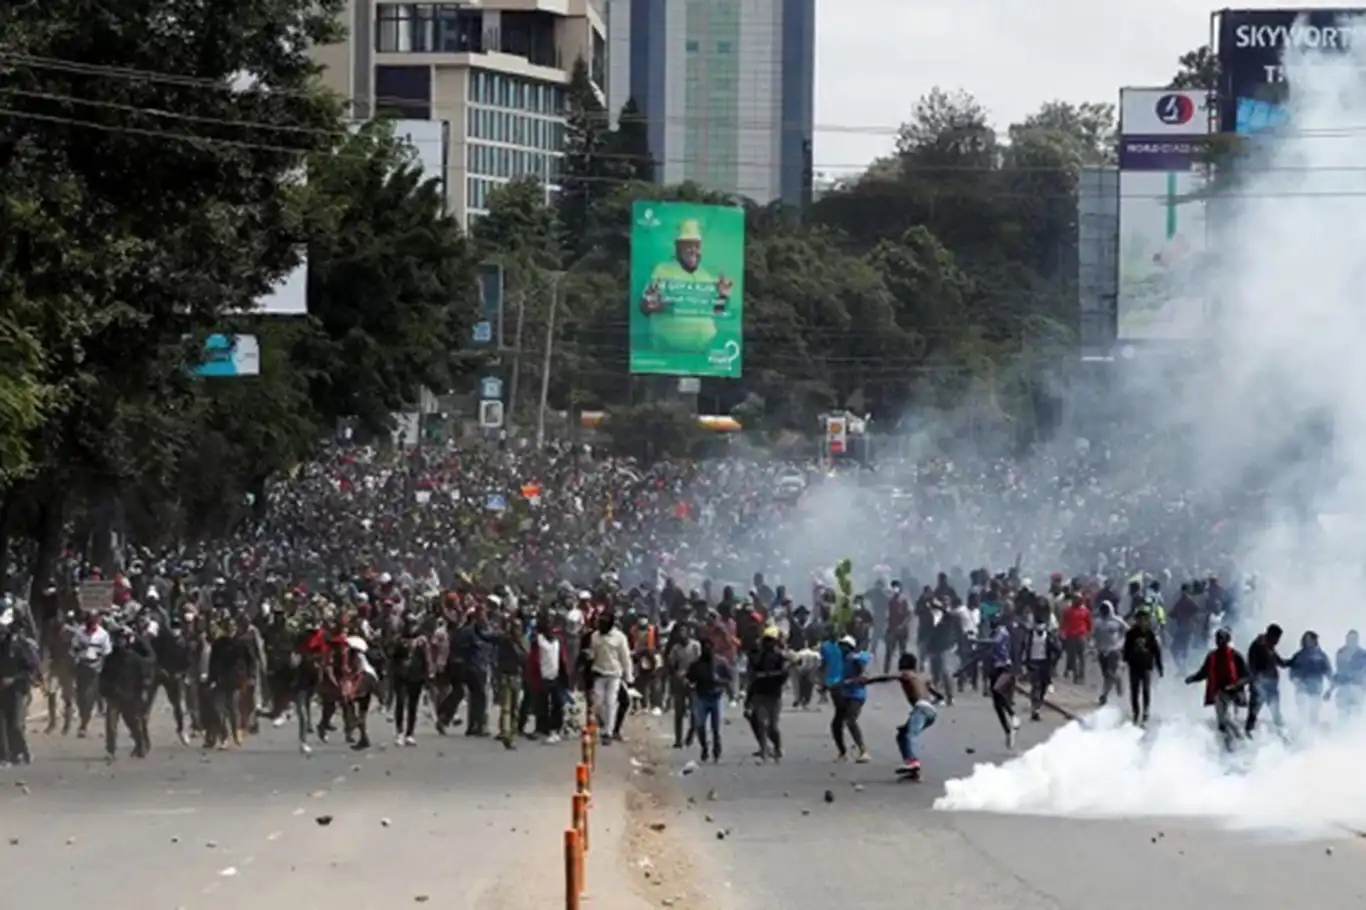 Human Rights Watch: At least 30 dead in Kenyan protests